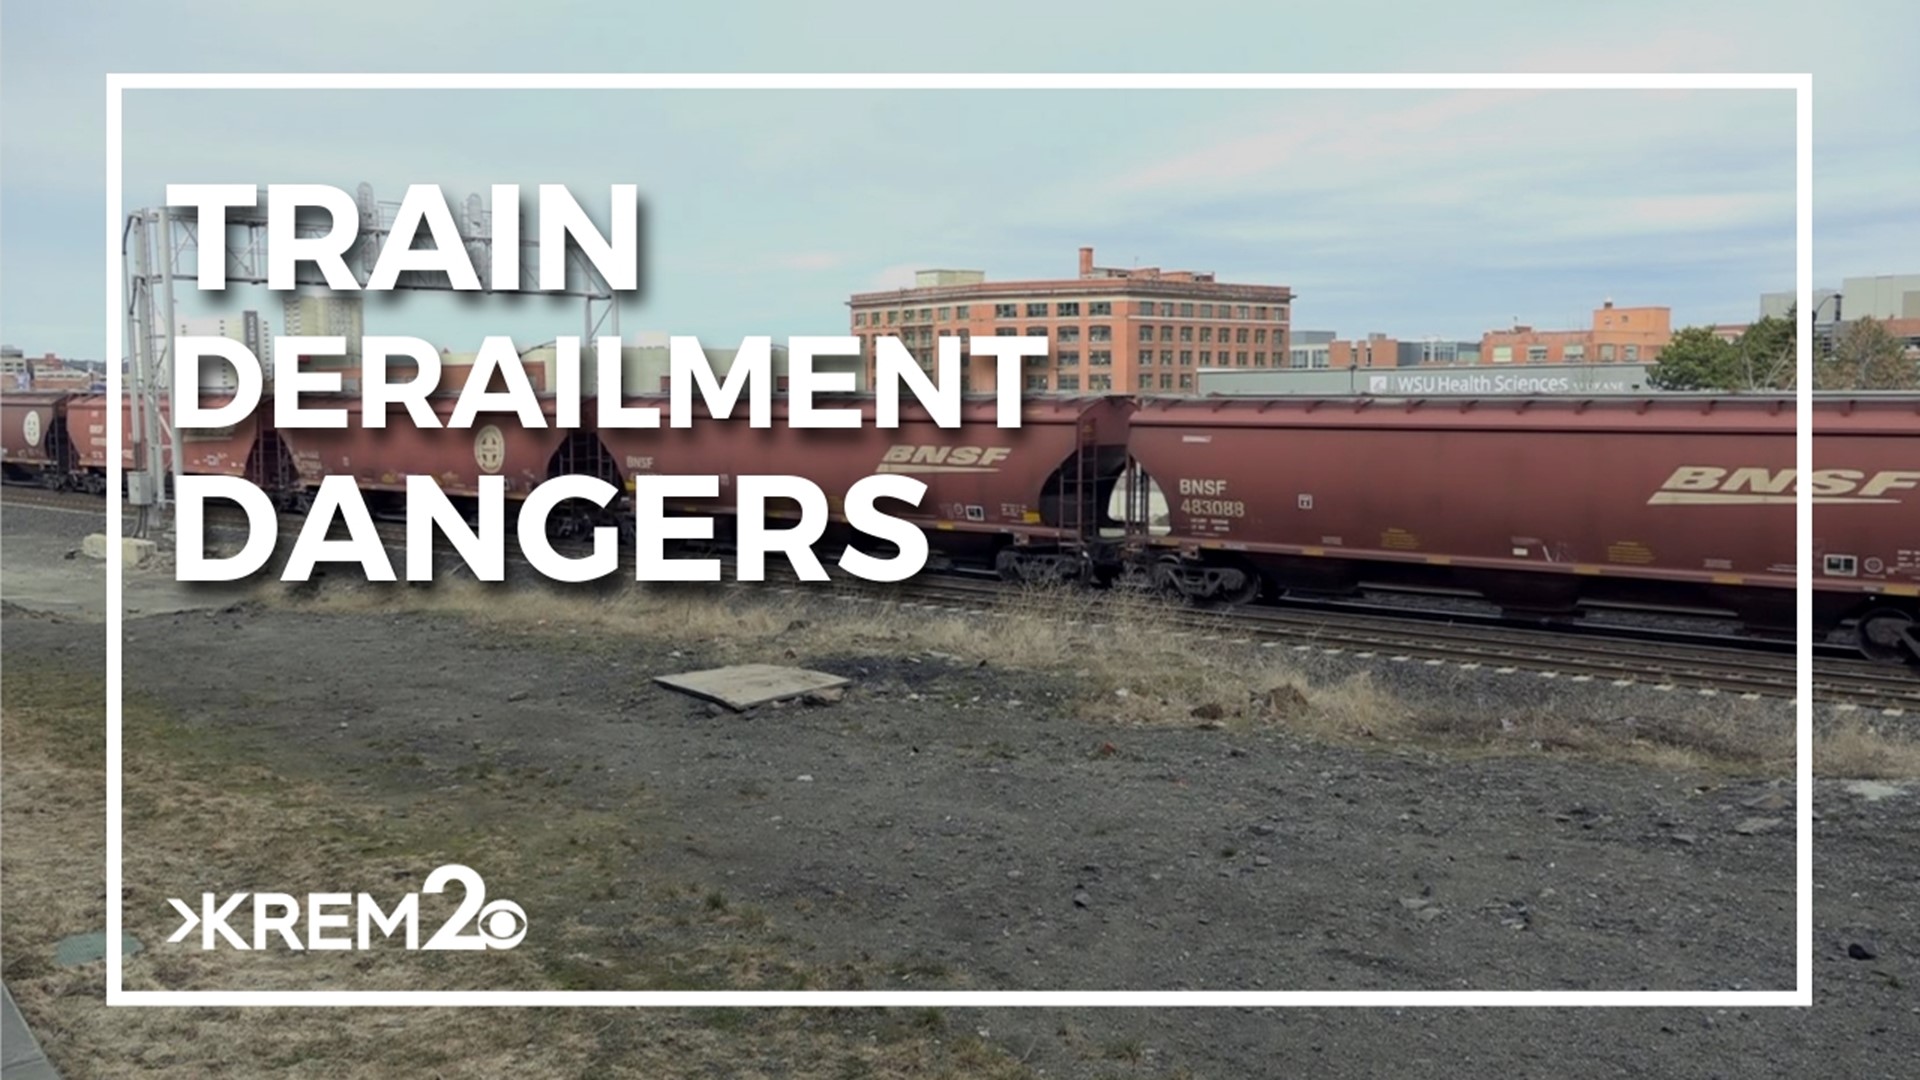 Hundreds of train cars run through Spokane, but what happens when those trains go off the tracks?